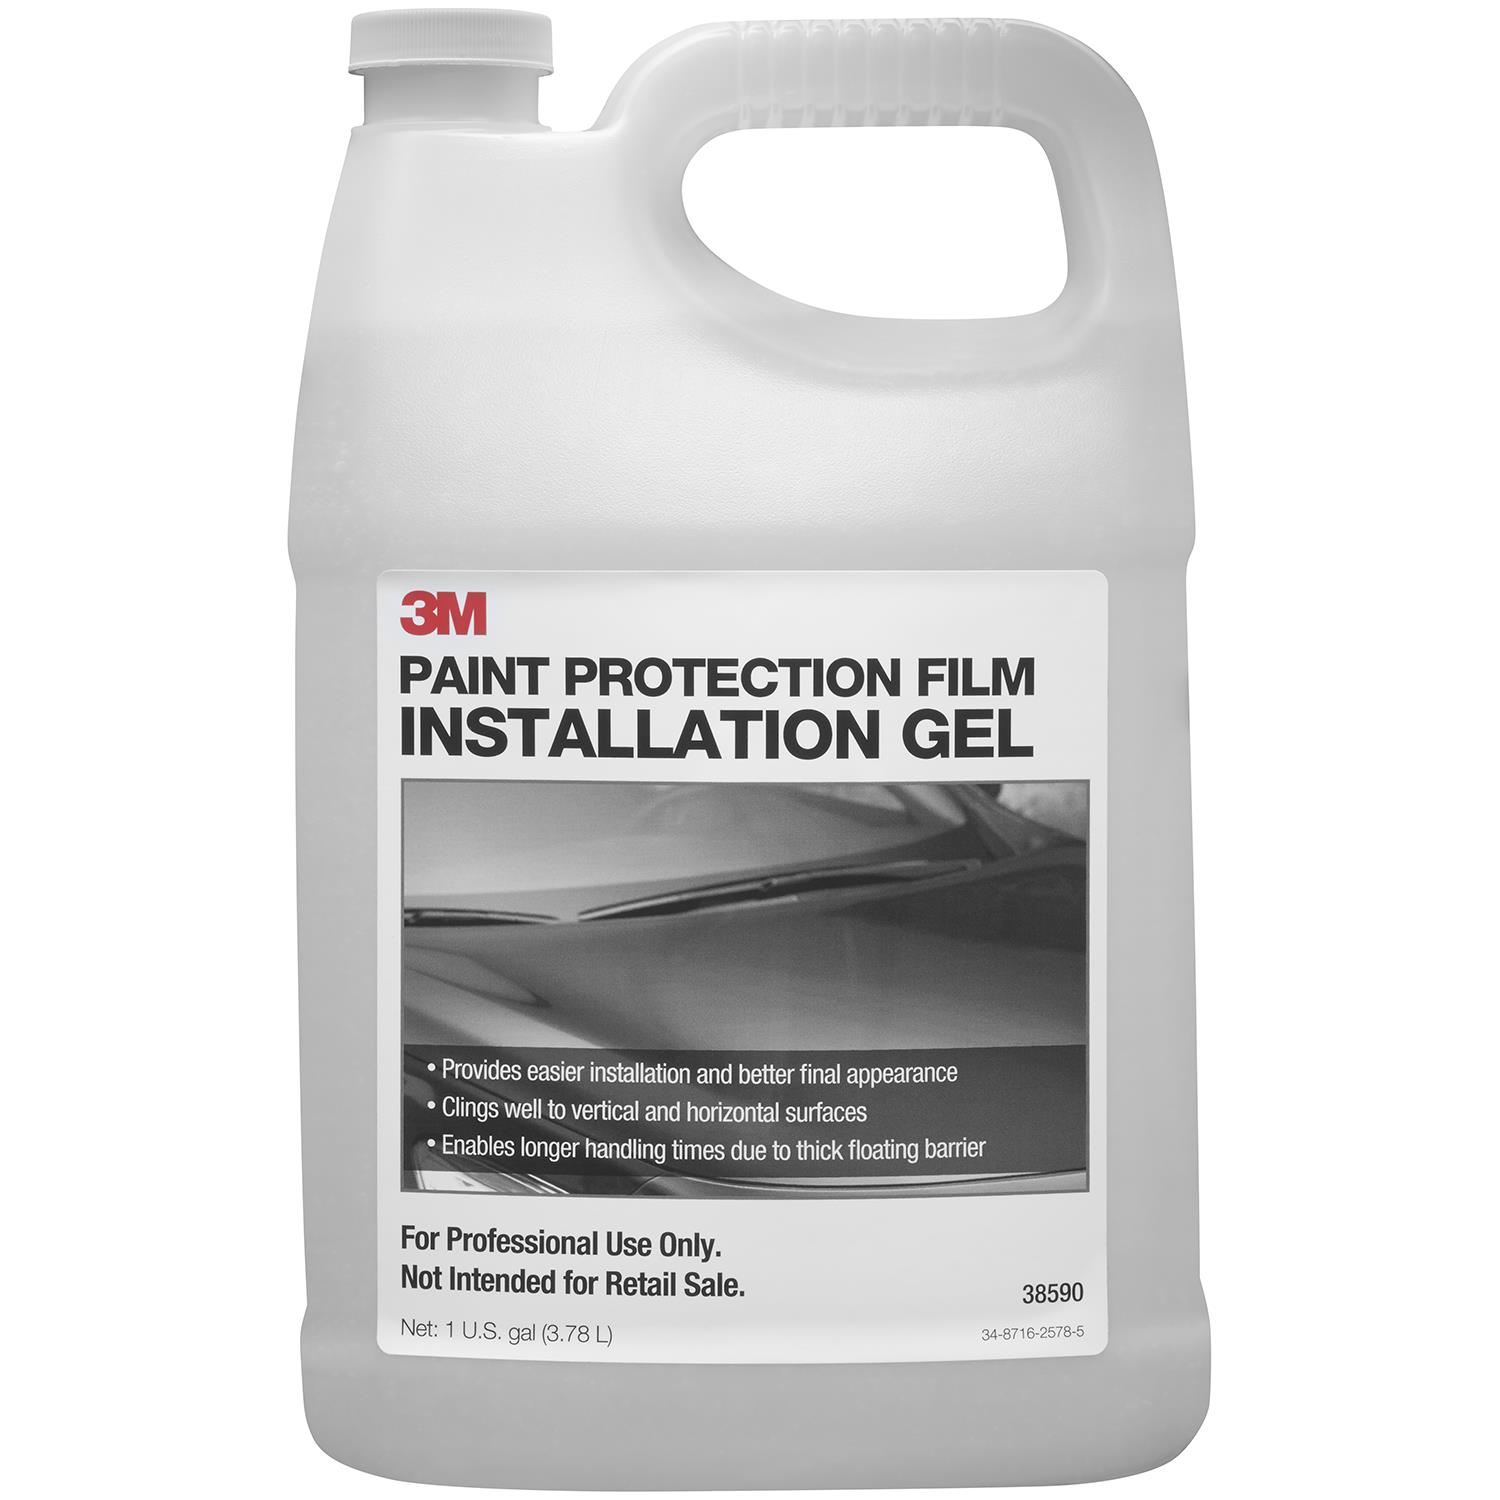 https://www.e-aircraftsupply.com/ItemImages/31/7100084531_3M_Paint_Protection_Film_Installation_Gel.jpg